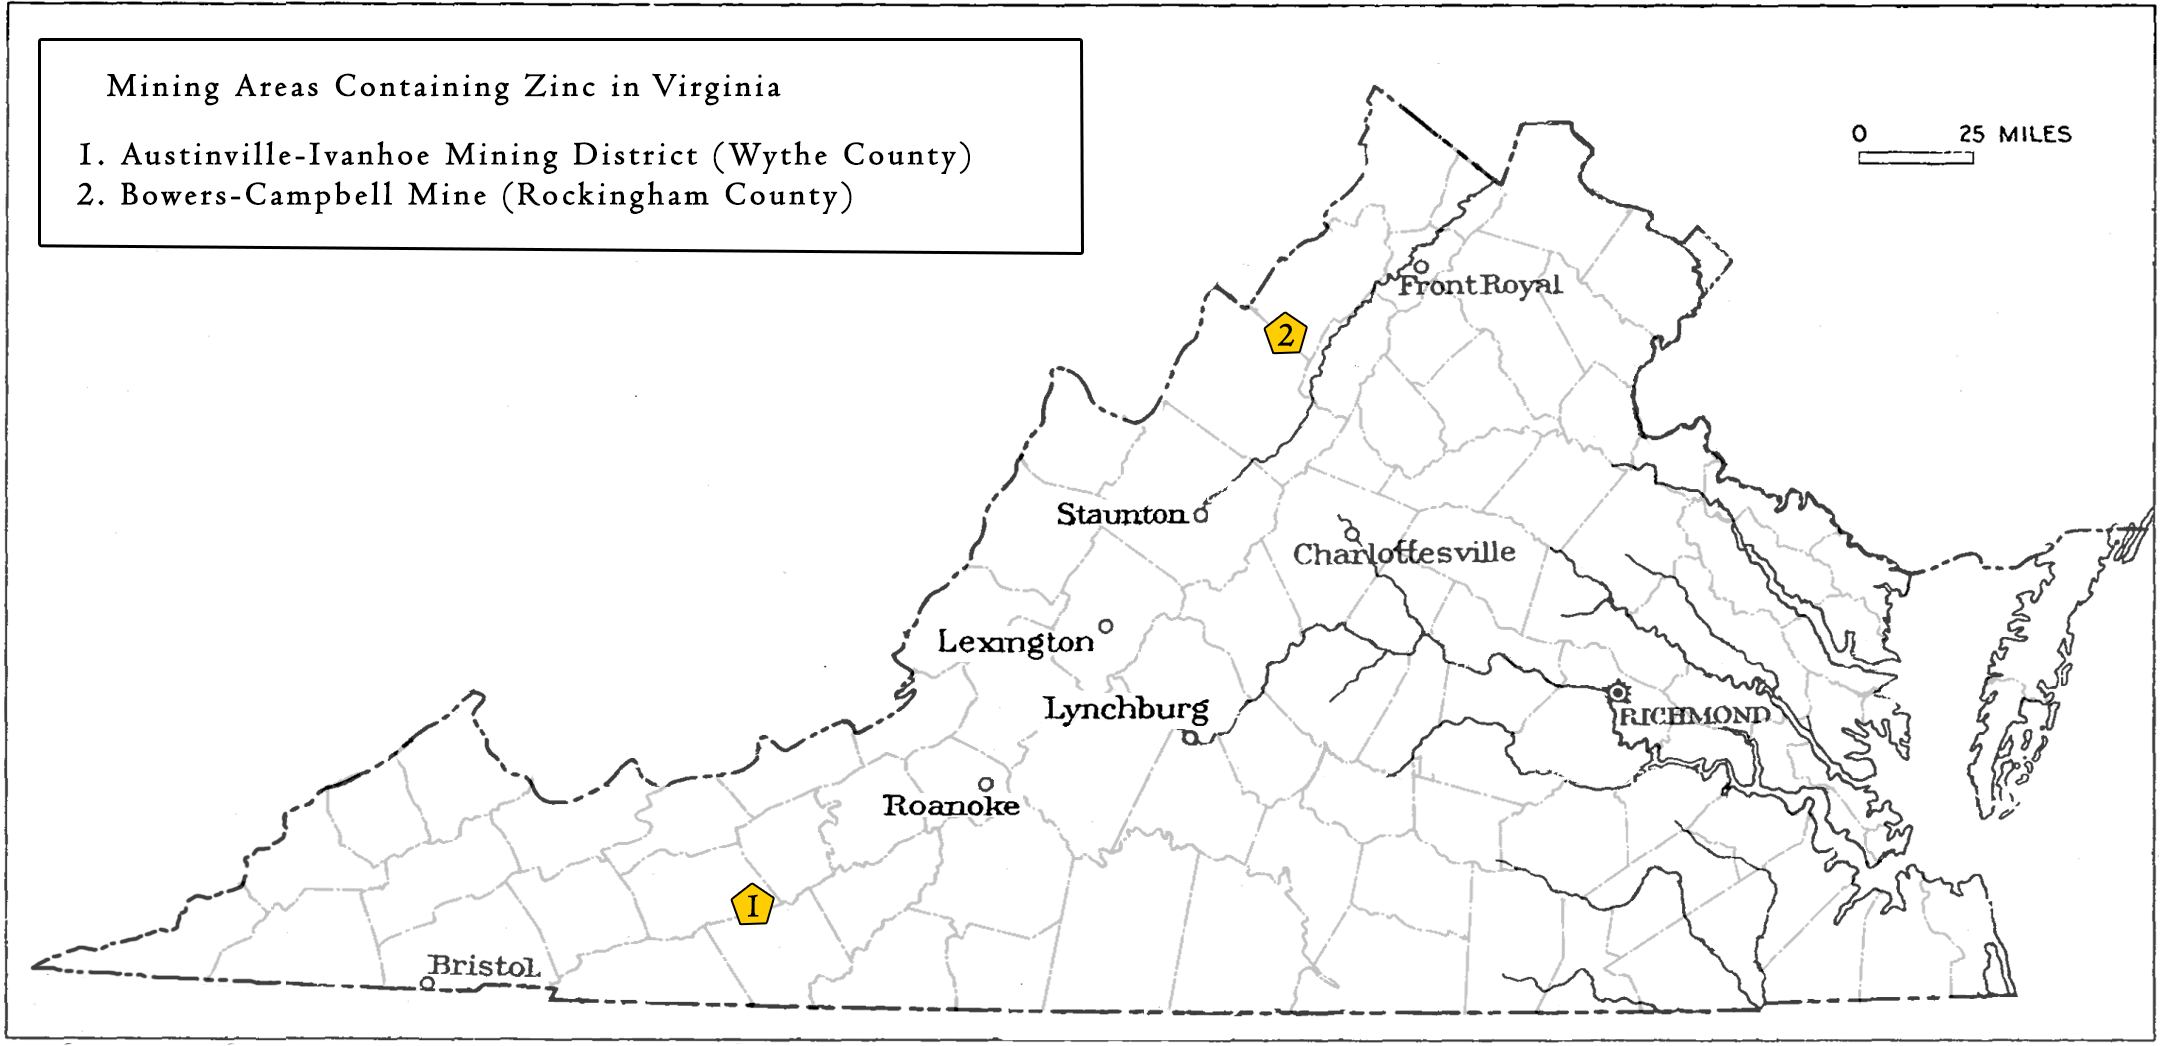 Significant zinc mining areas in the Valley and Ridge and Piedmont Provinces.  